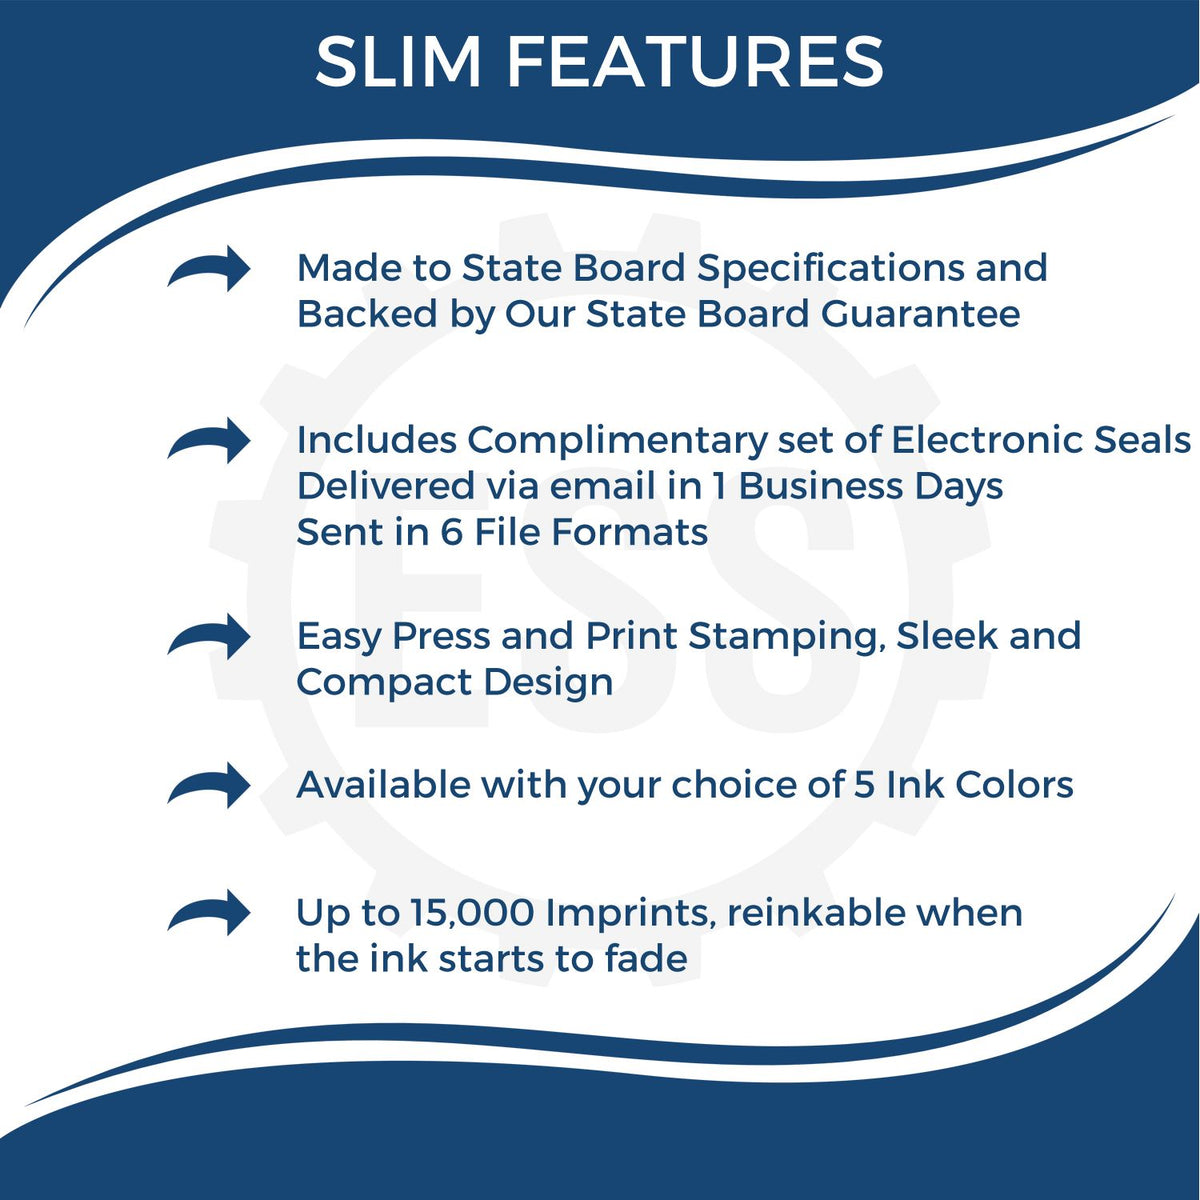 A picture of an infographic highlighting the selling points for the Super Slim Nevada Notary Public Stamp